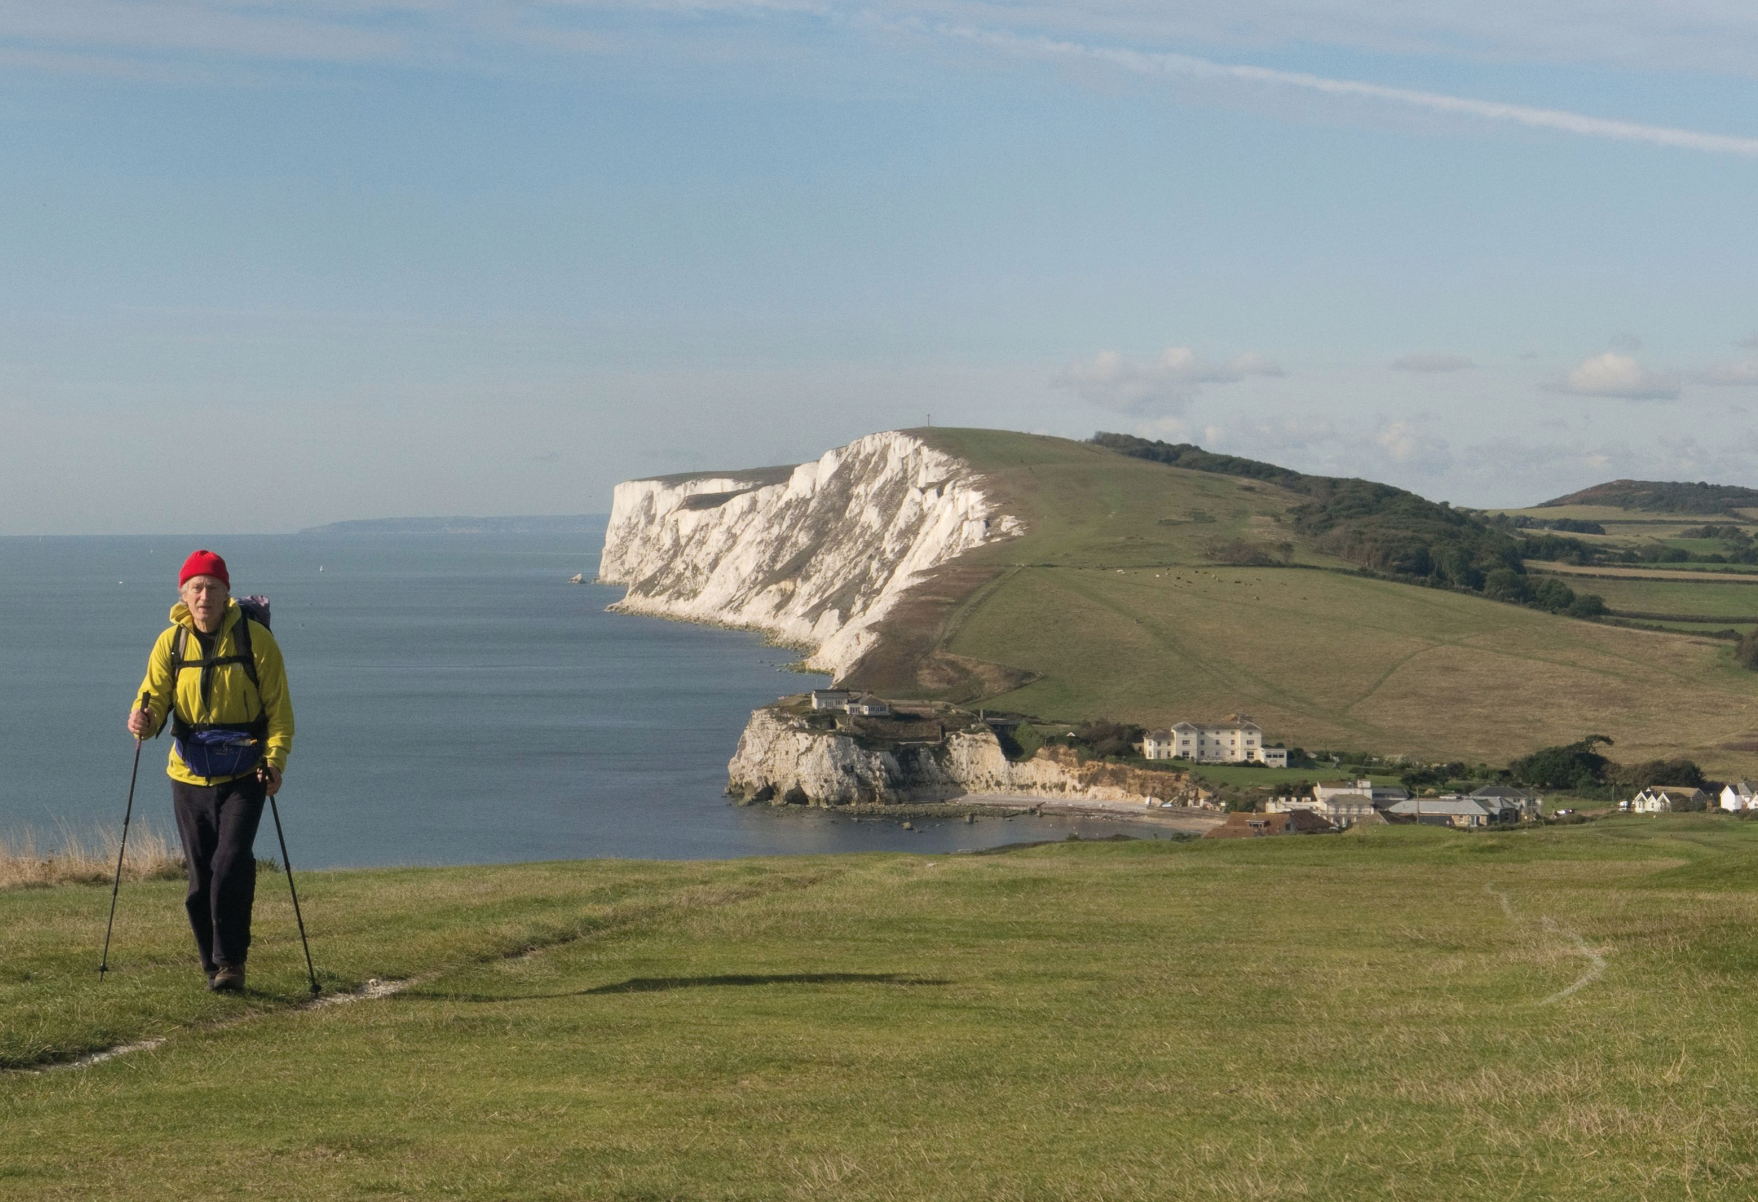 Pocket Rough Guide British Breaks Isle of Wight